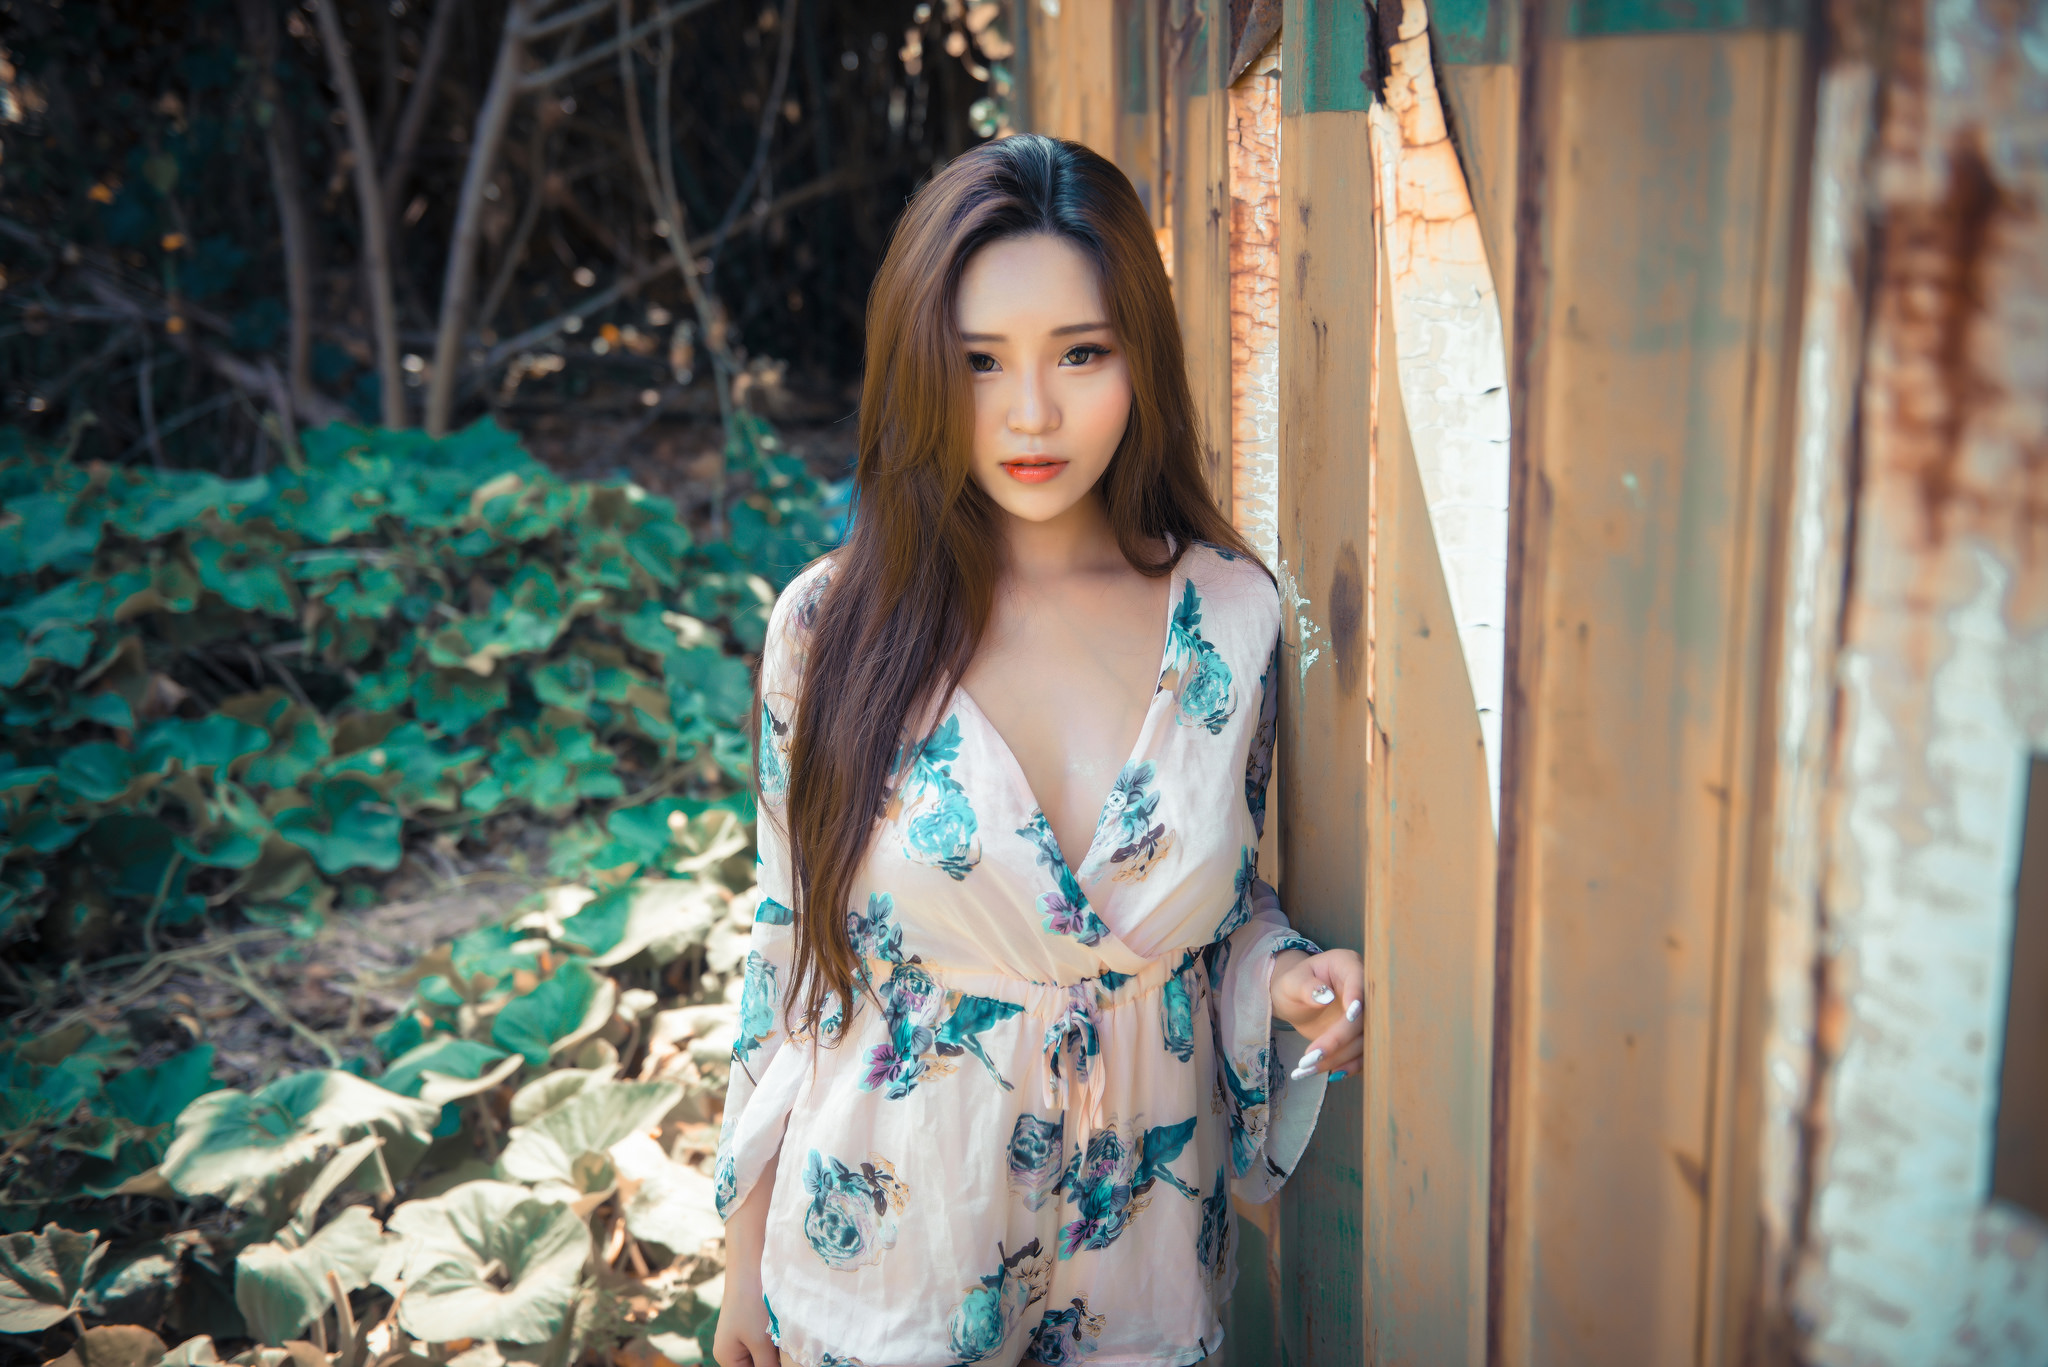 People 2048x1367 Asian women women outdoors brunette model plants cleavage playsuit looking at viewer long hair painted nails